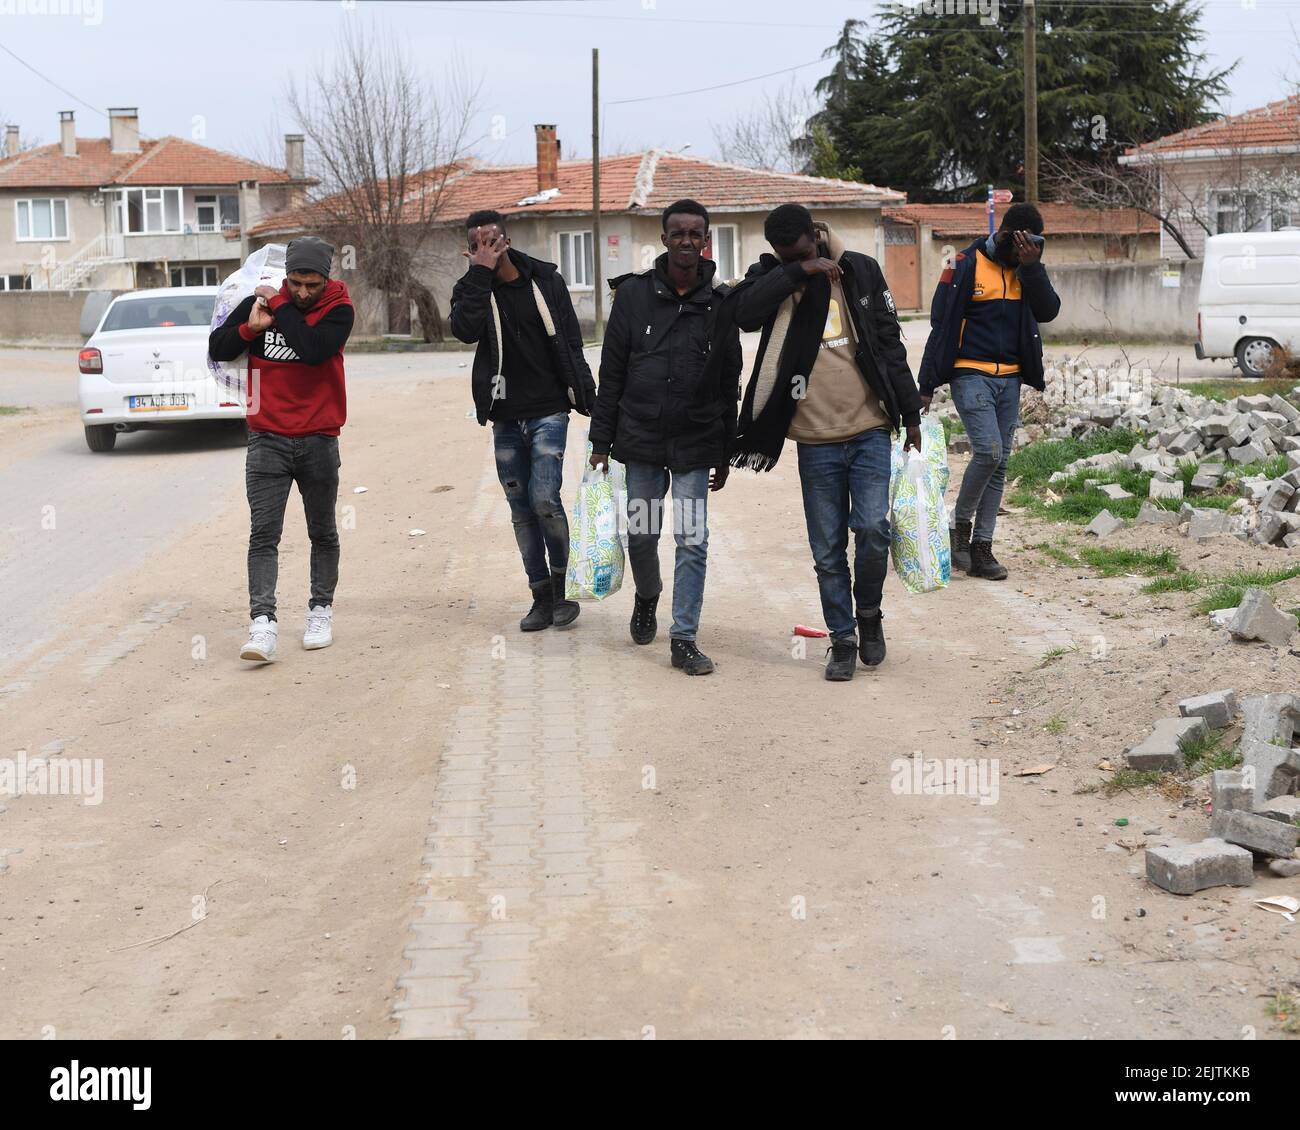 A group of refugees walking on the road hide their faces. The humanitarian  crisis in Edrine, Turkey on the border with Greece is currently at a  standoff with approximately 6,000 refugees remaining